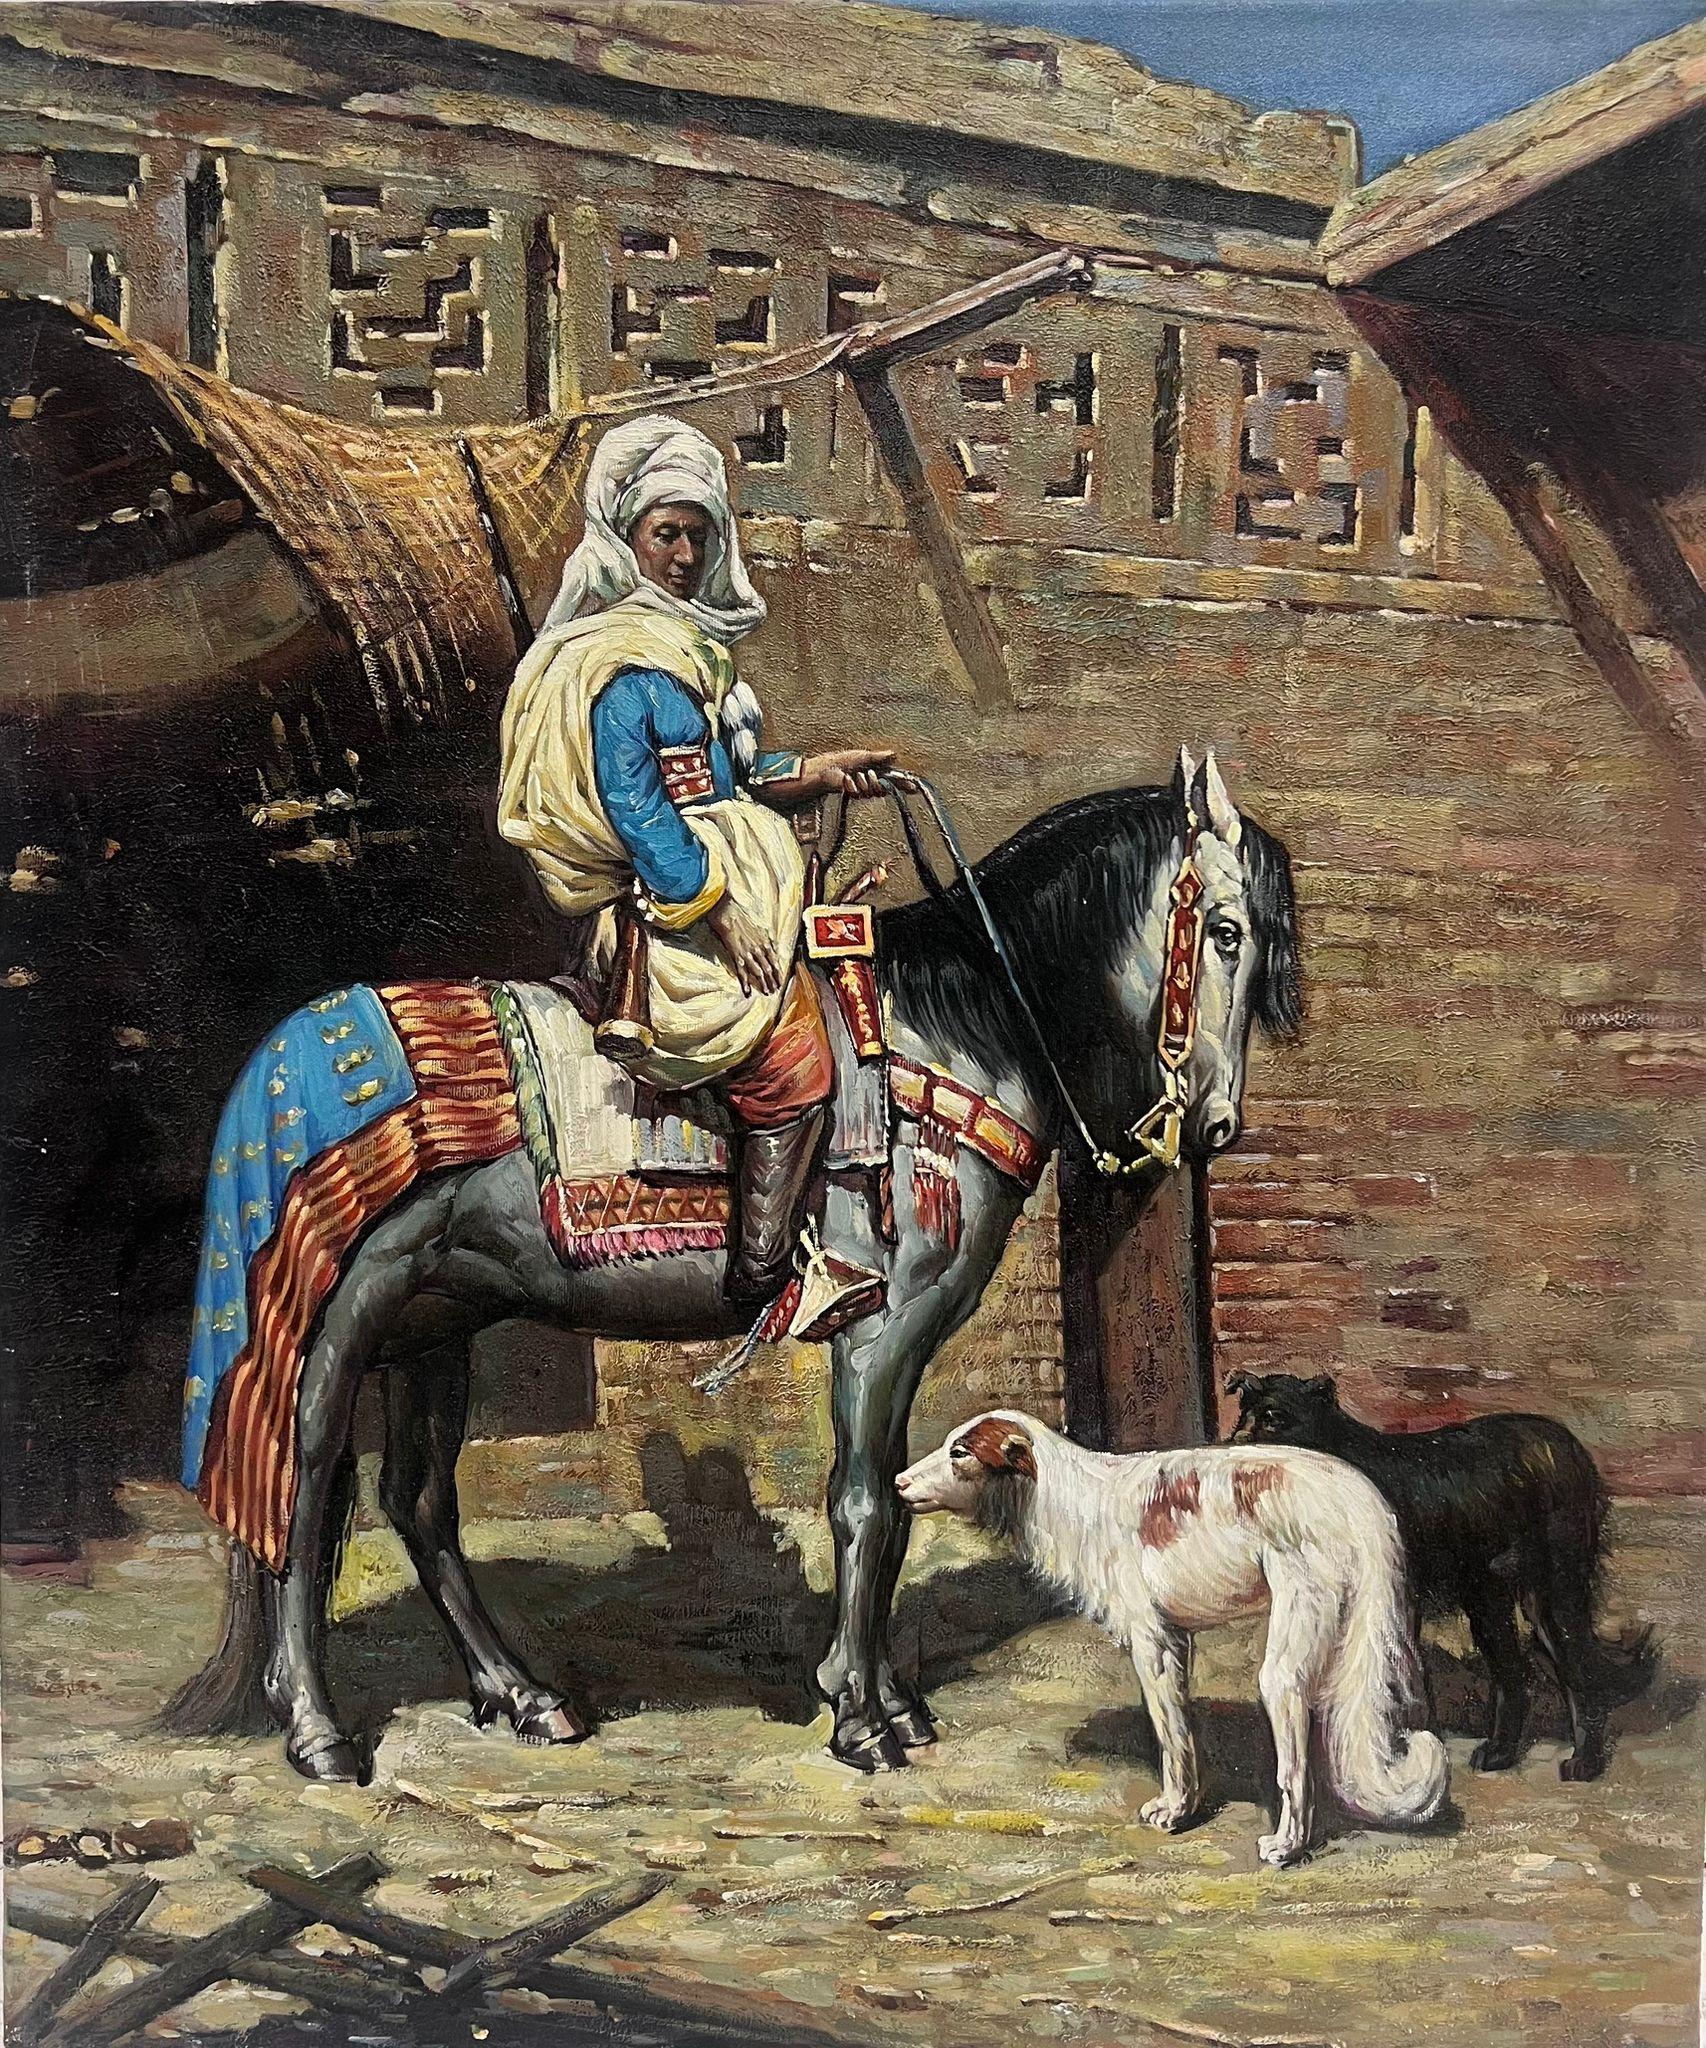 European Artist Figurative Painting - North African Orientalist Scene Man on Horseback with Dogs outside City Building